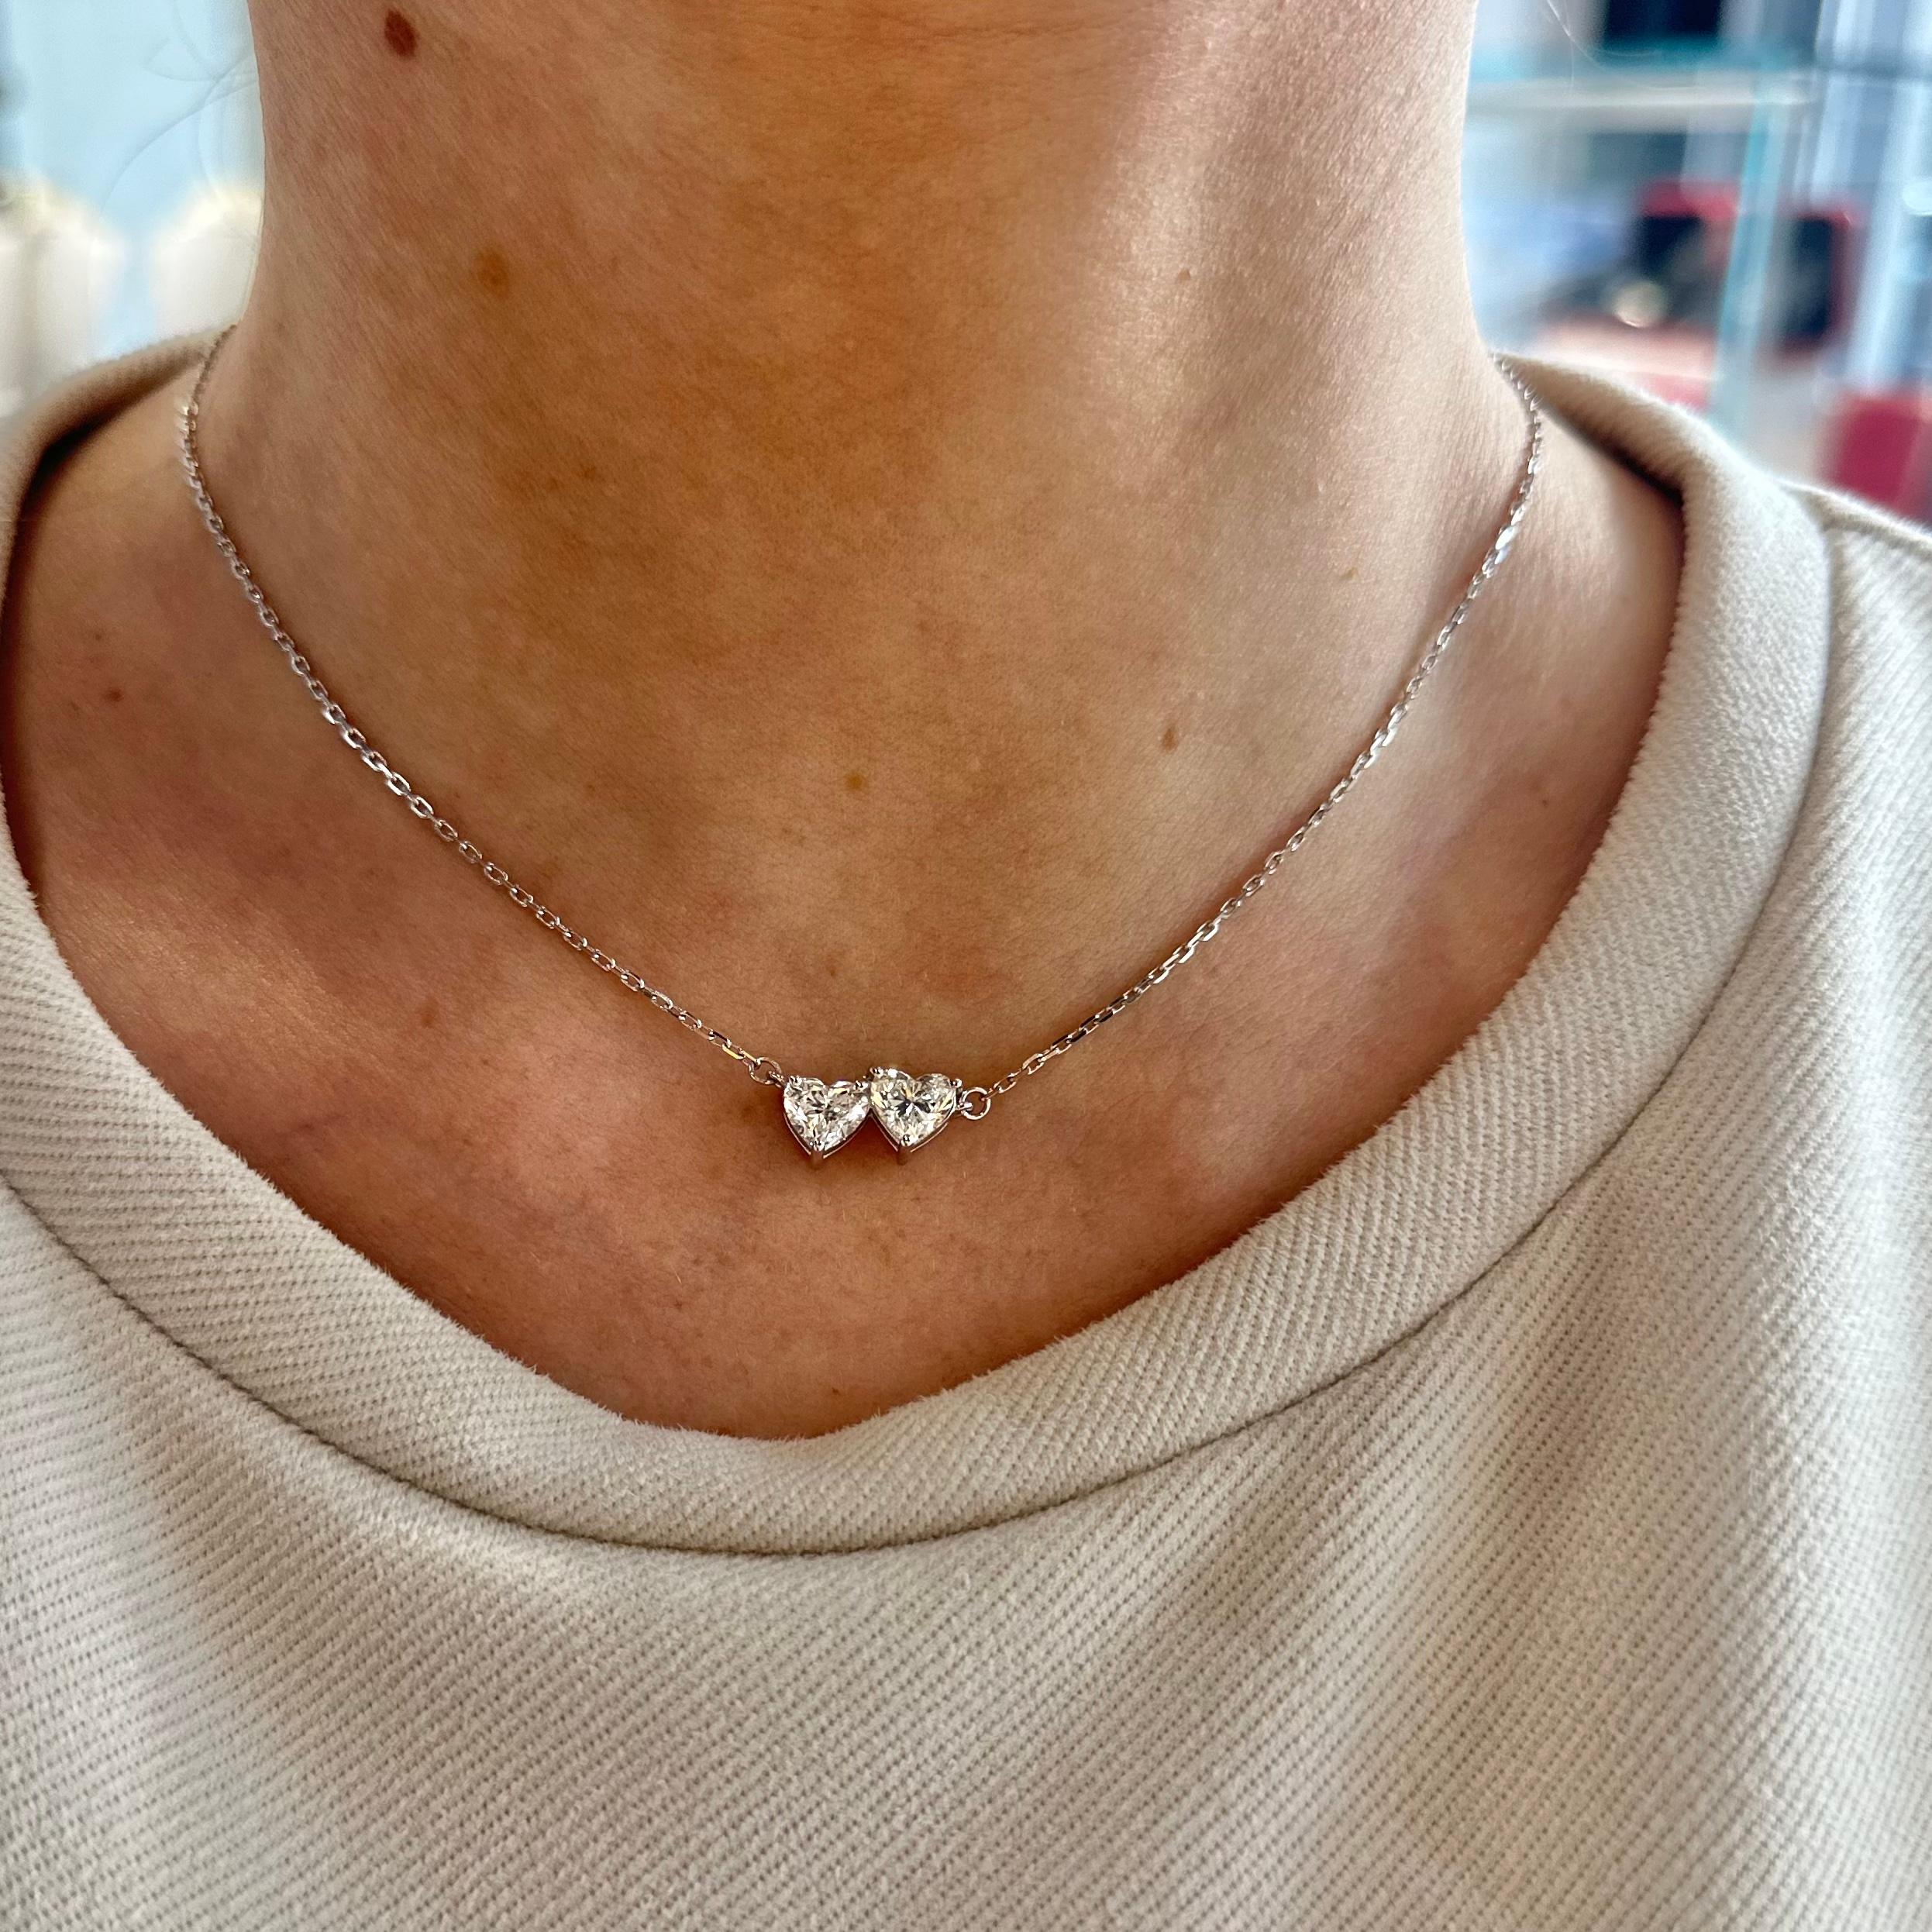 Style: Diamond Hearts Necklace

Metal: White Gold 

Metal Purity: 18K

Stones: Diamonds​​​​​​​

Diamond Clarity: SI2

First Stone Carat Weight: 0.96 ct

Second Stone Carat Weight: 0.91 ct

Total Carat Weight: 1.2 ct 

Chain Length: 16 in

Total